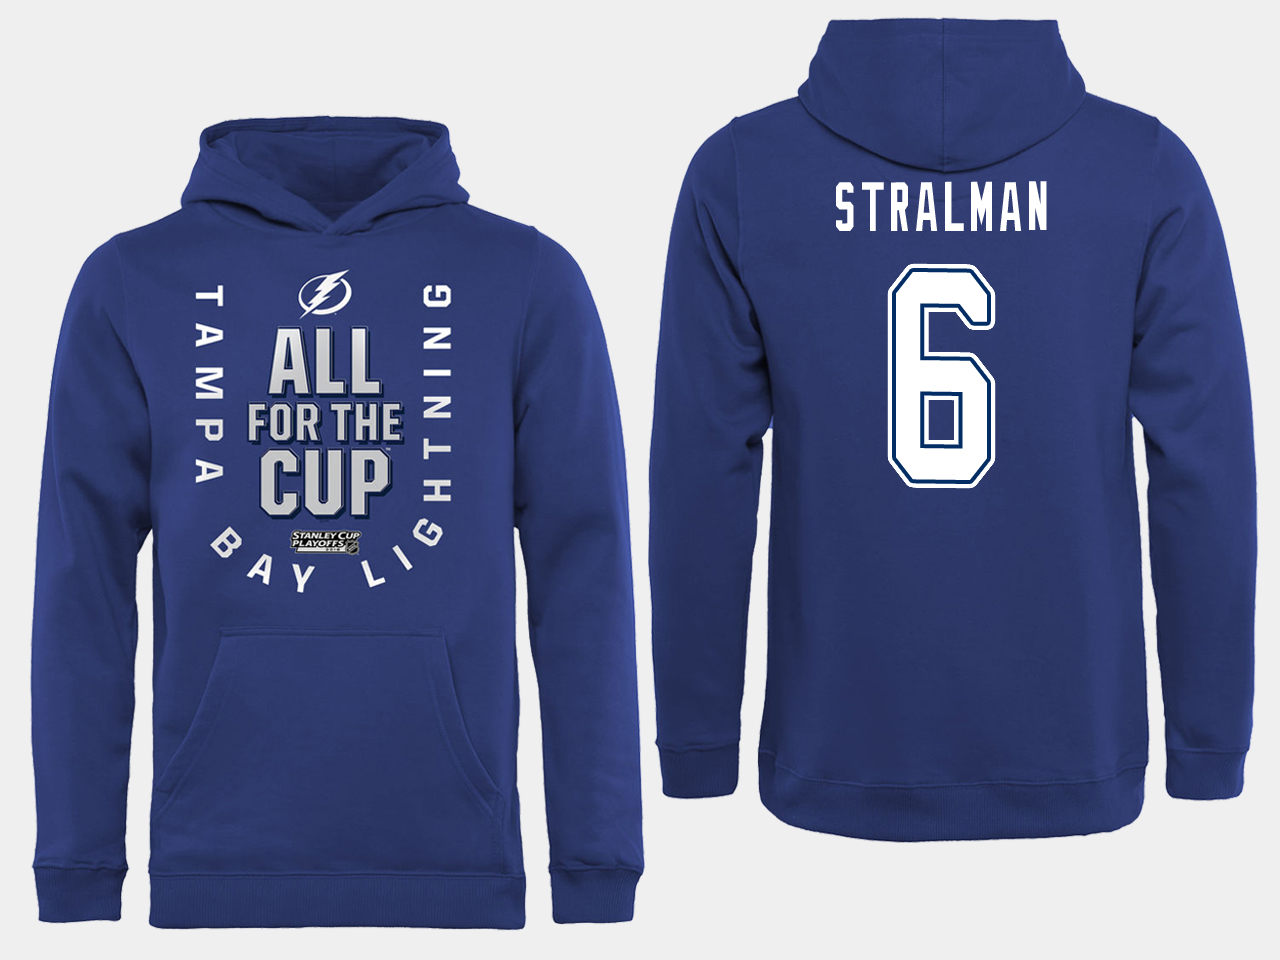 NHL Men adidas Tampa Bay Lightning #6 Stralman blue All for the Cup Hoodie